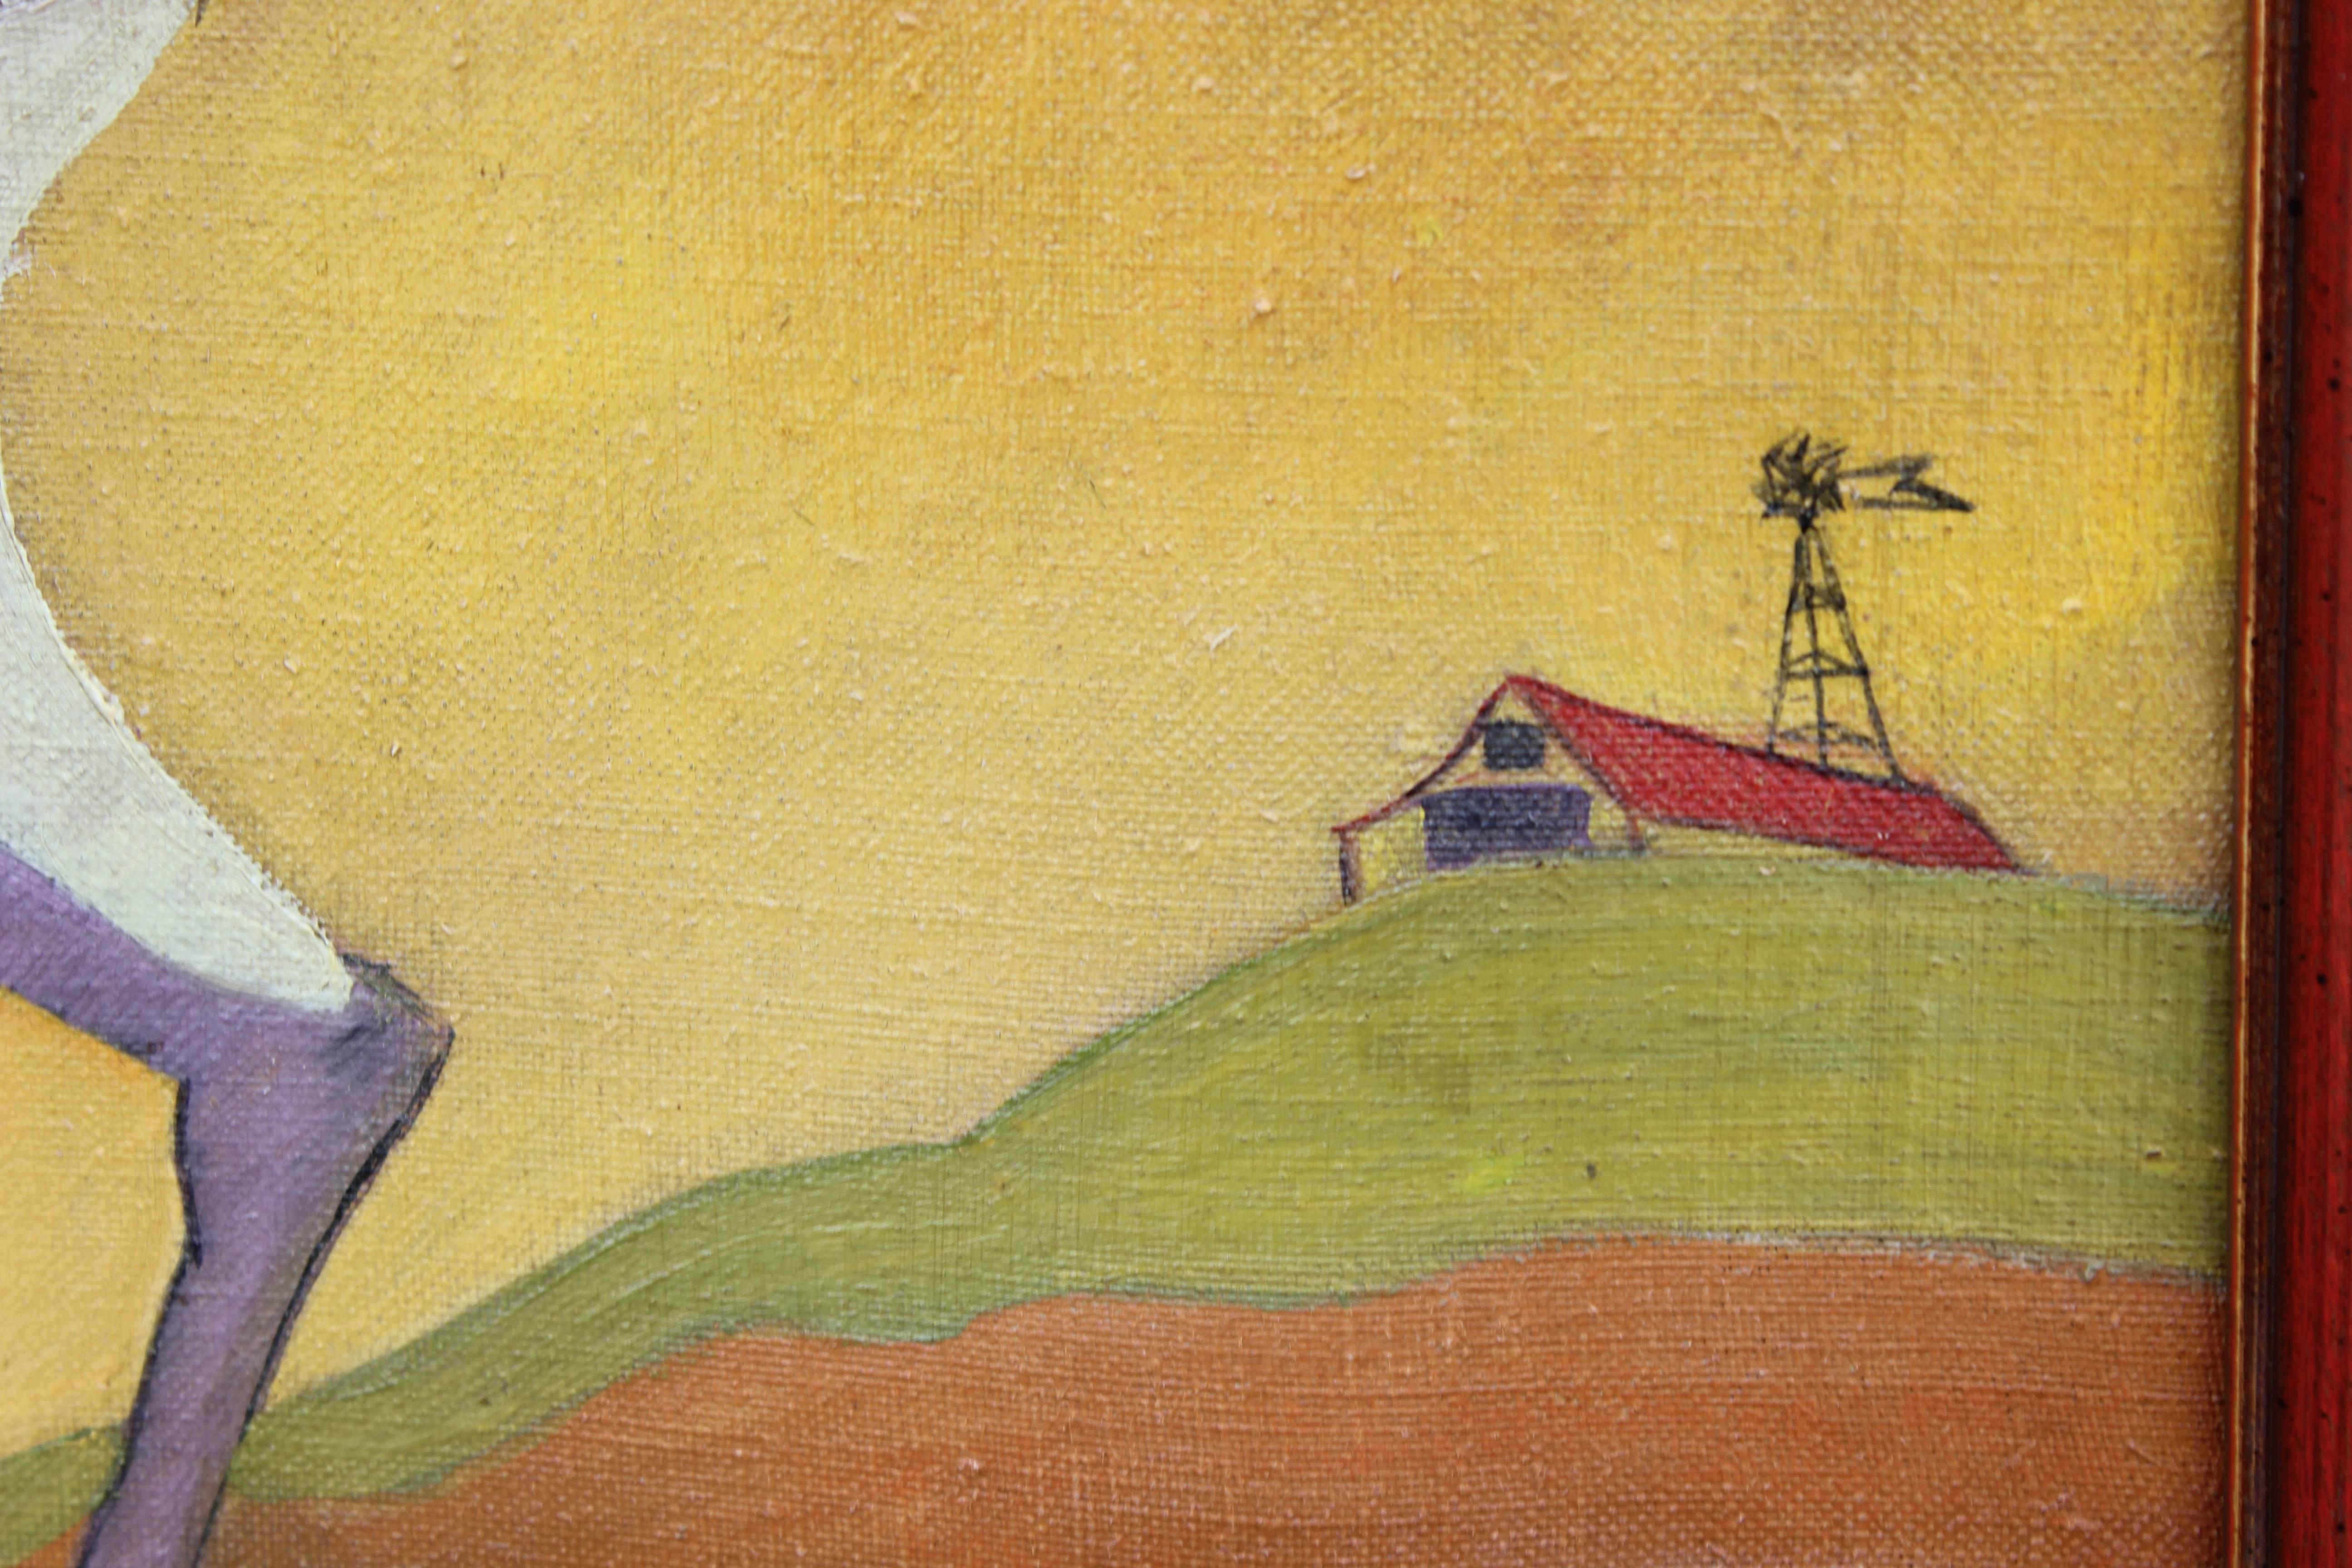 Surrealist painting from 1950 by artist Camilo of a nude woman leading a purple horse through a bright yellow and orange landscape with a small barn in the background. 